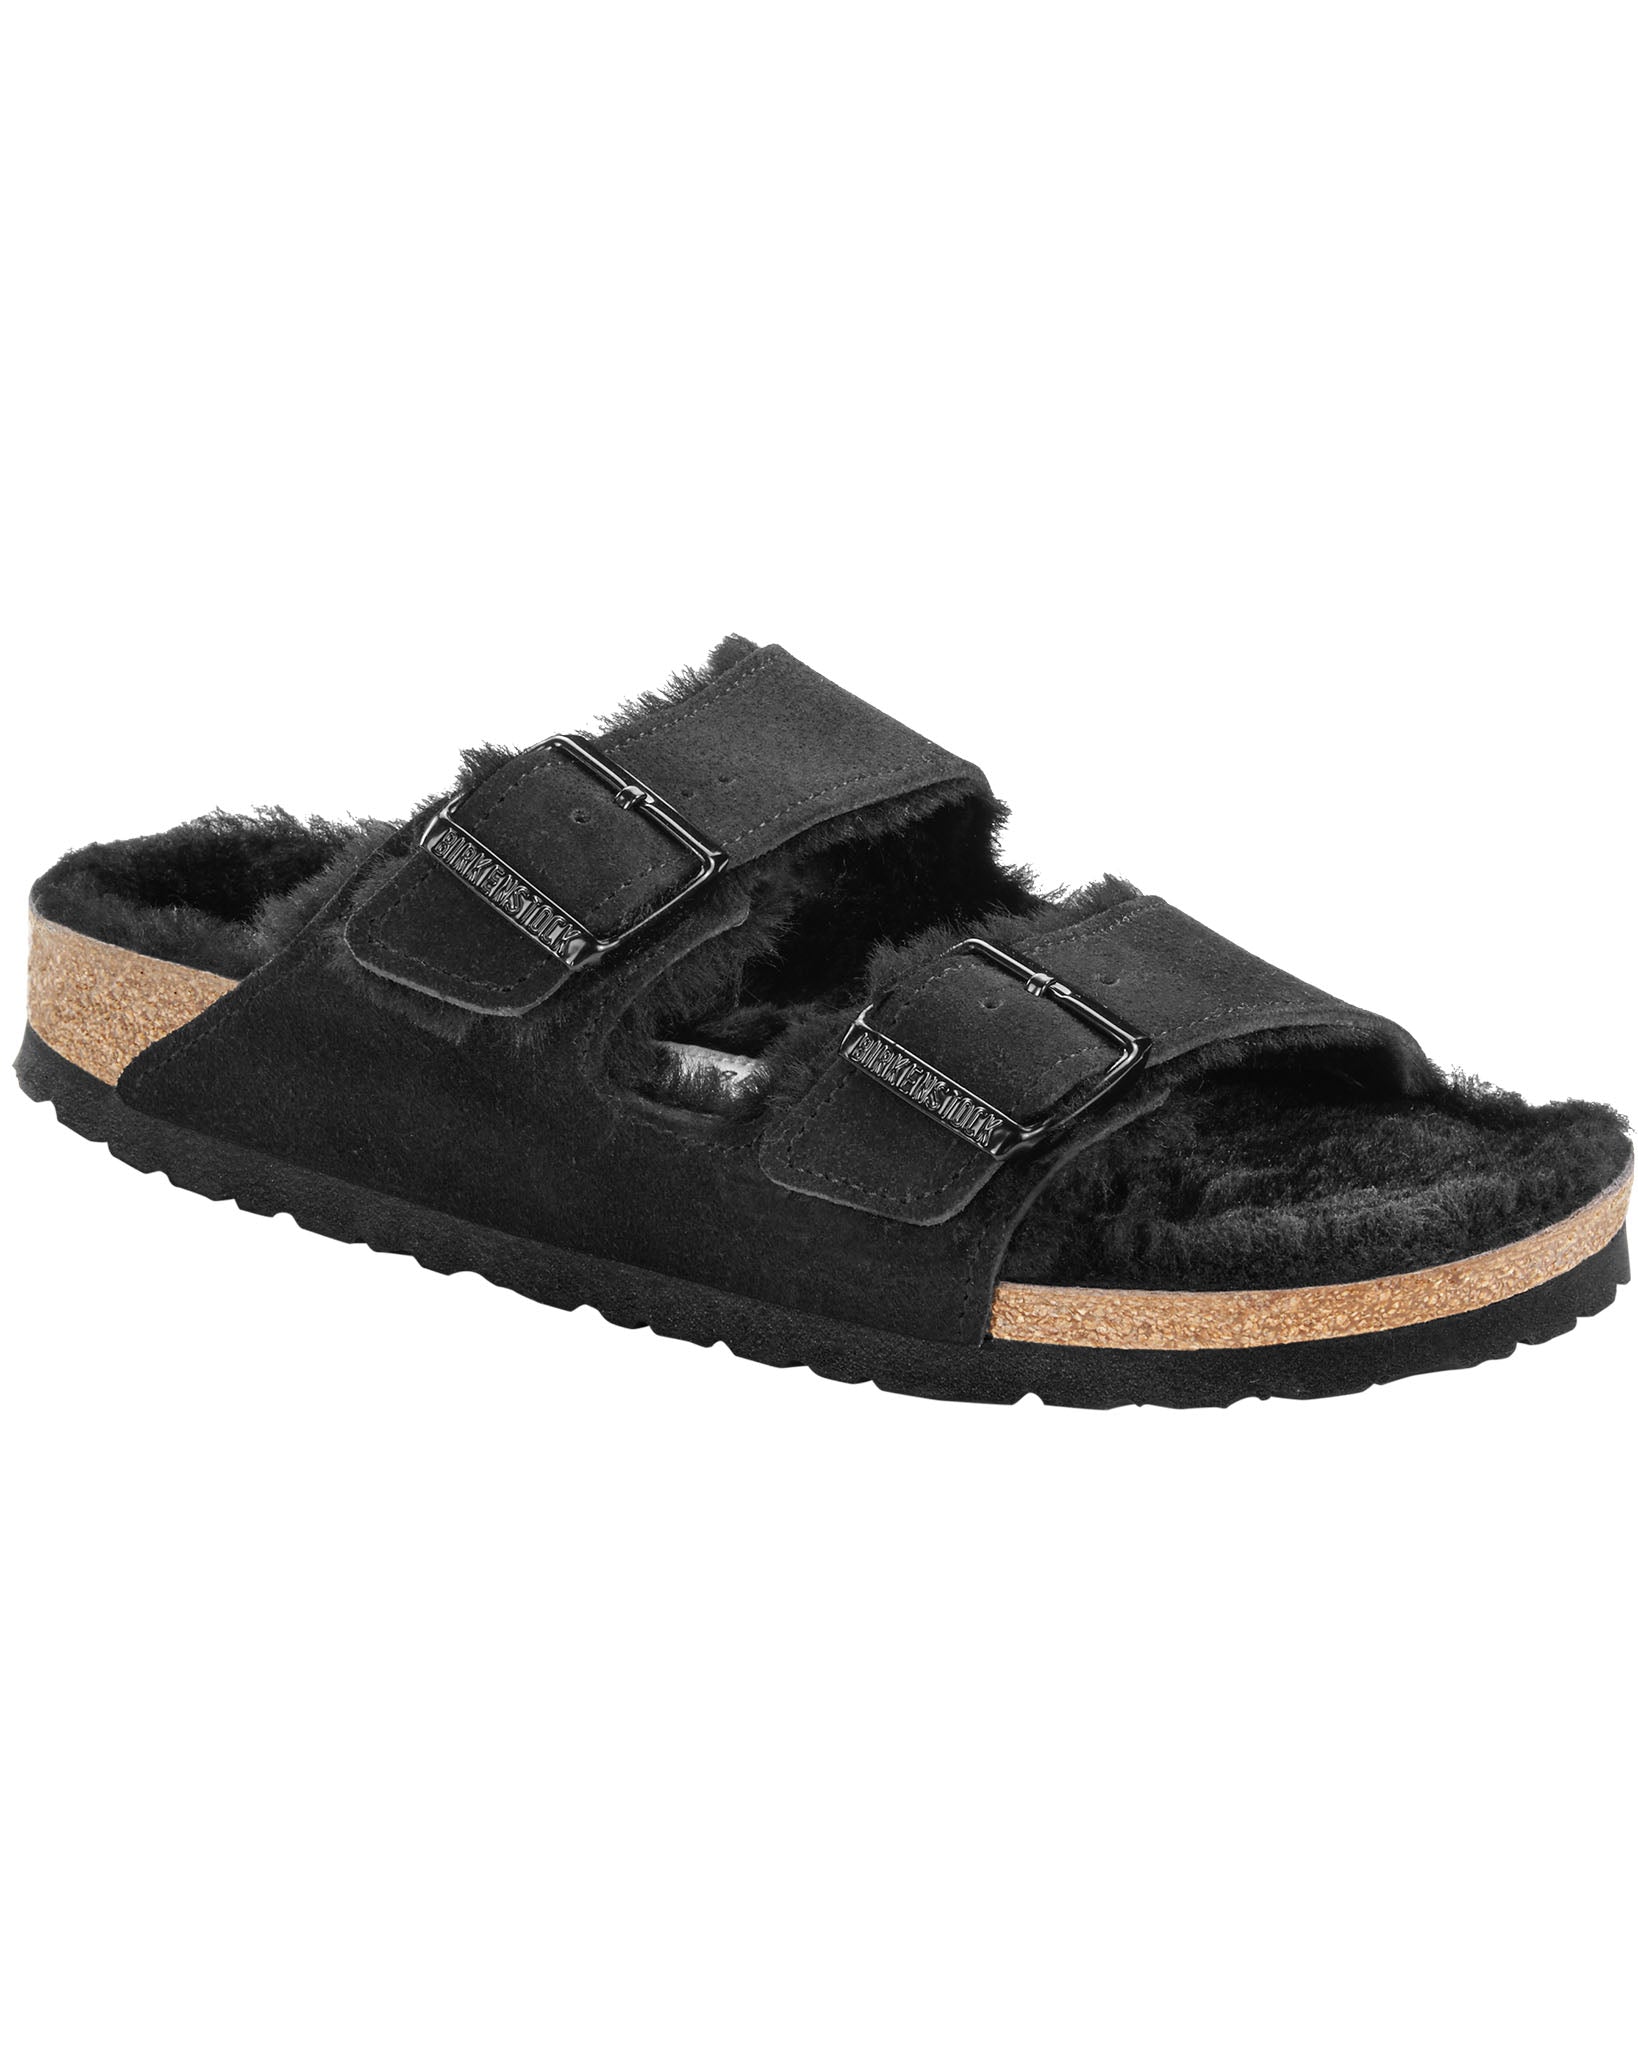 Arizona Shearling Black Suede Leather Sandals